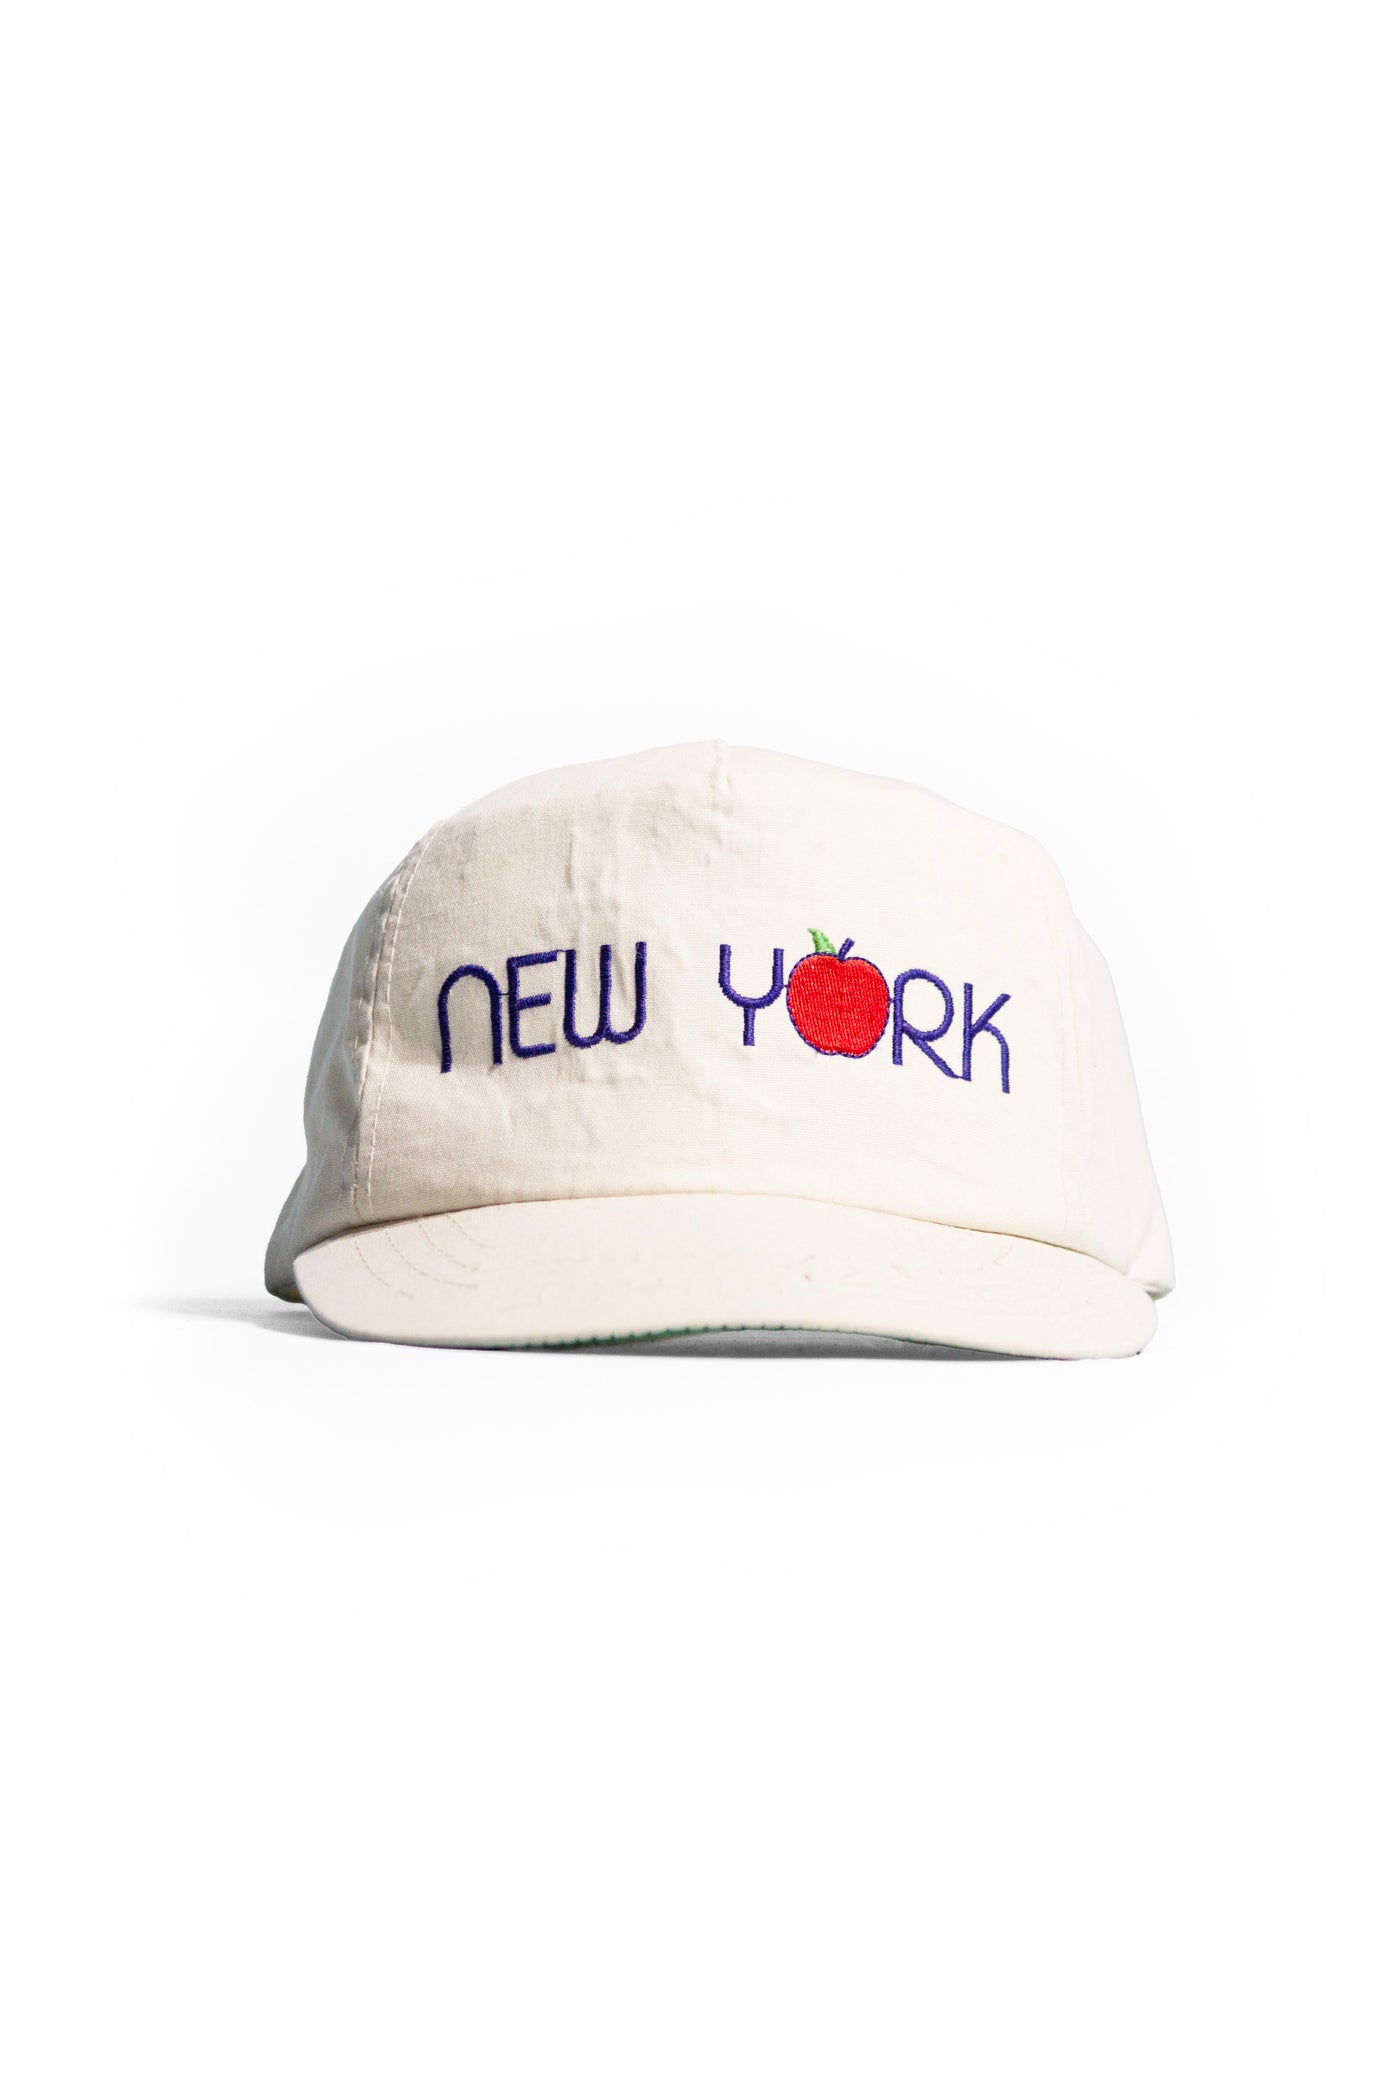 Vintage 90s New York Spellout Snapback